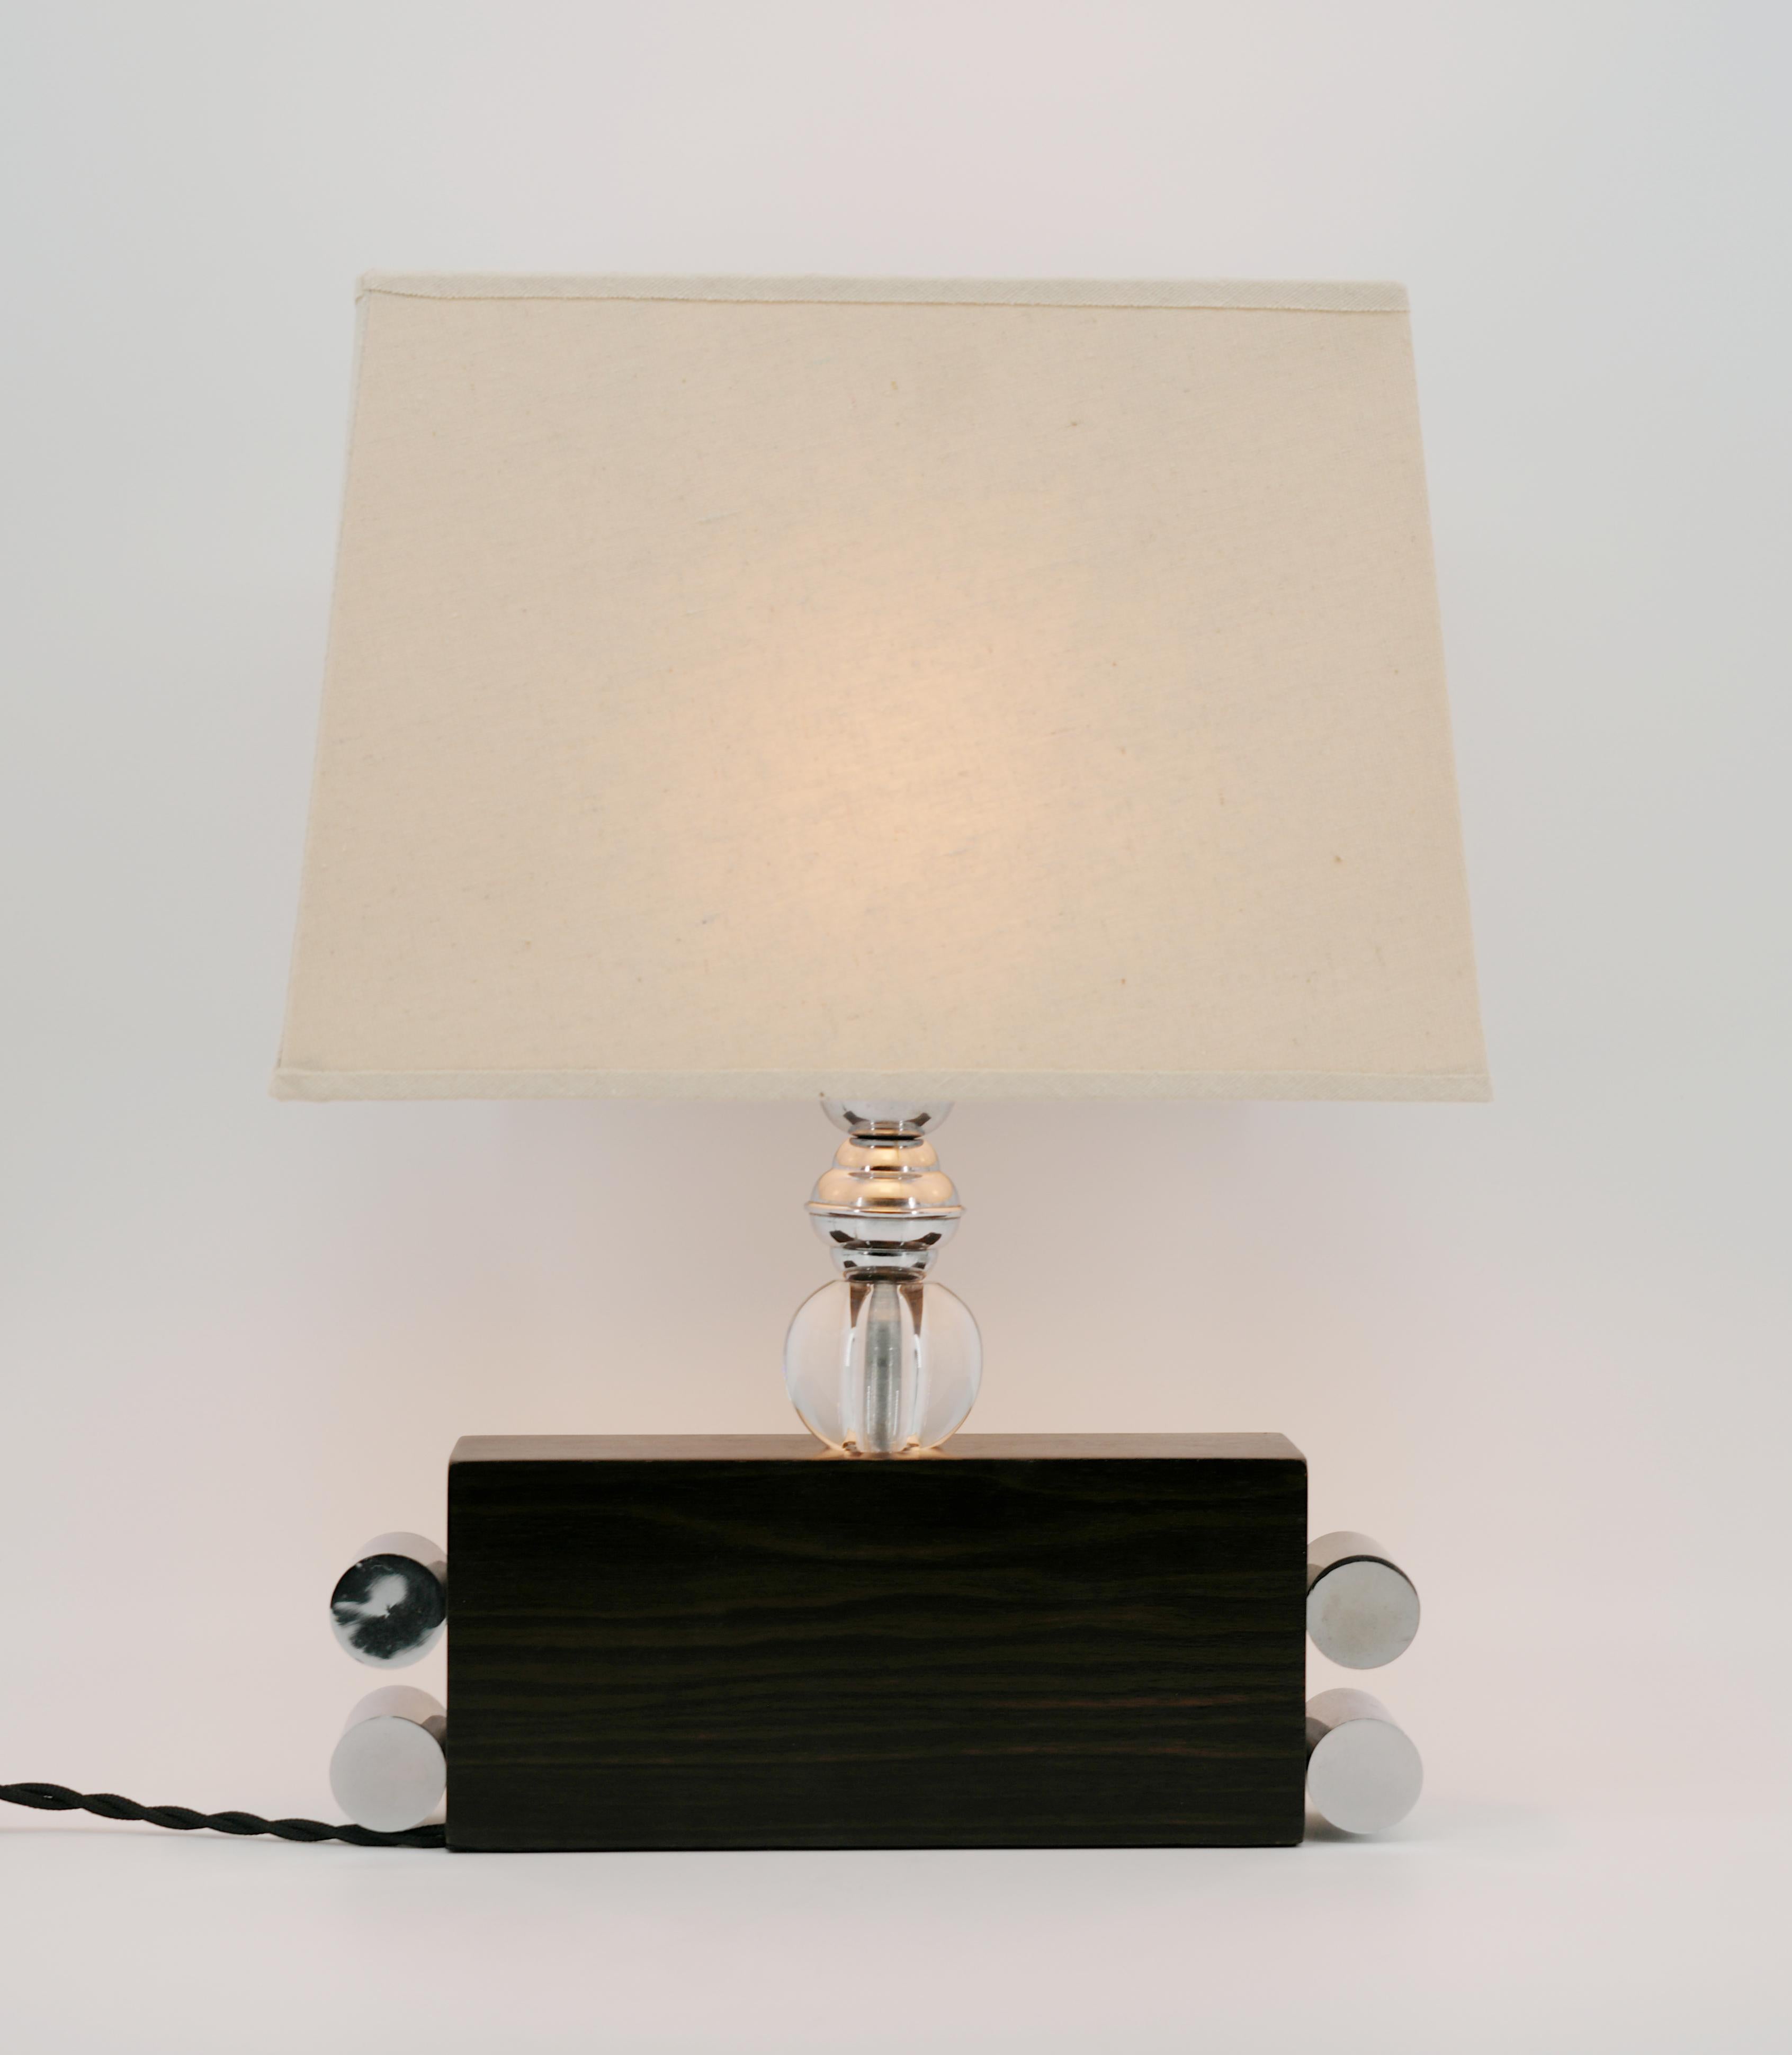 French Art Deco Macassar Table Lamp, 1930 For Sale 2